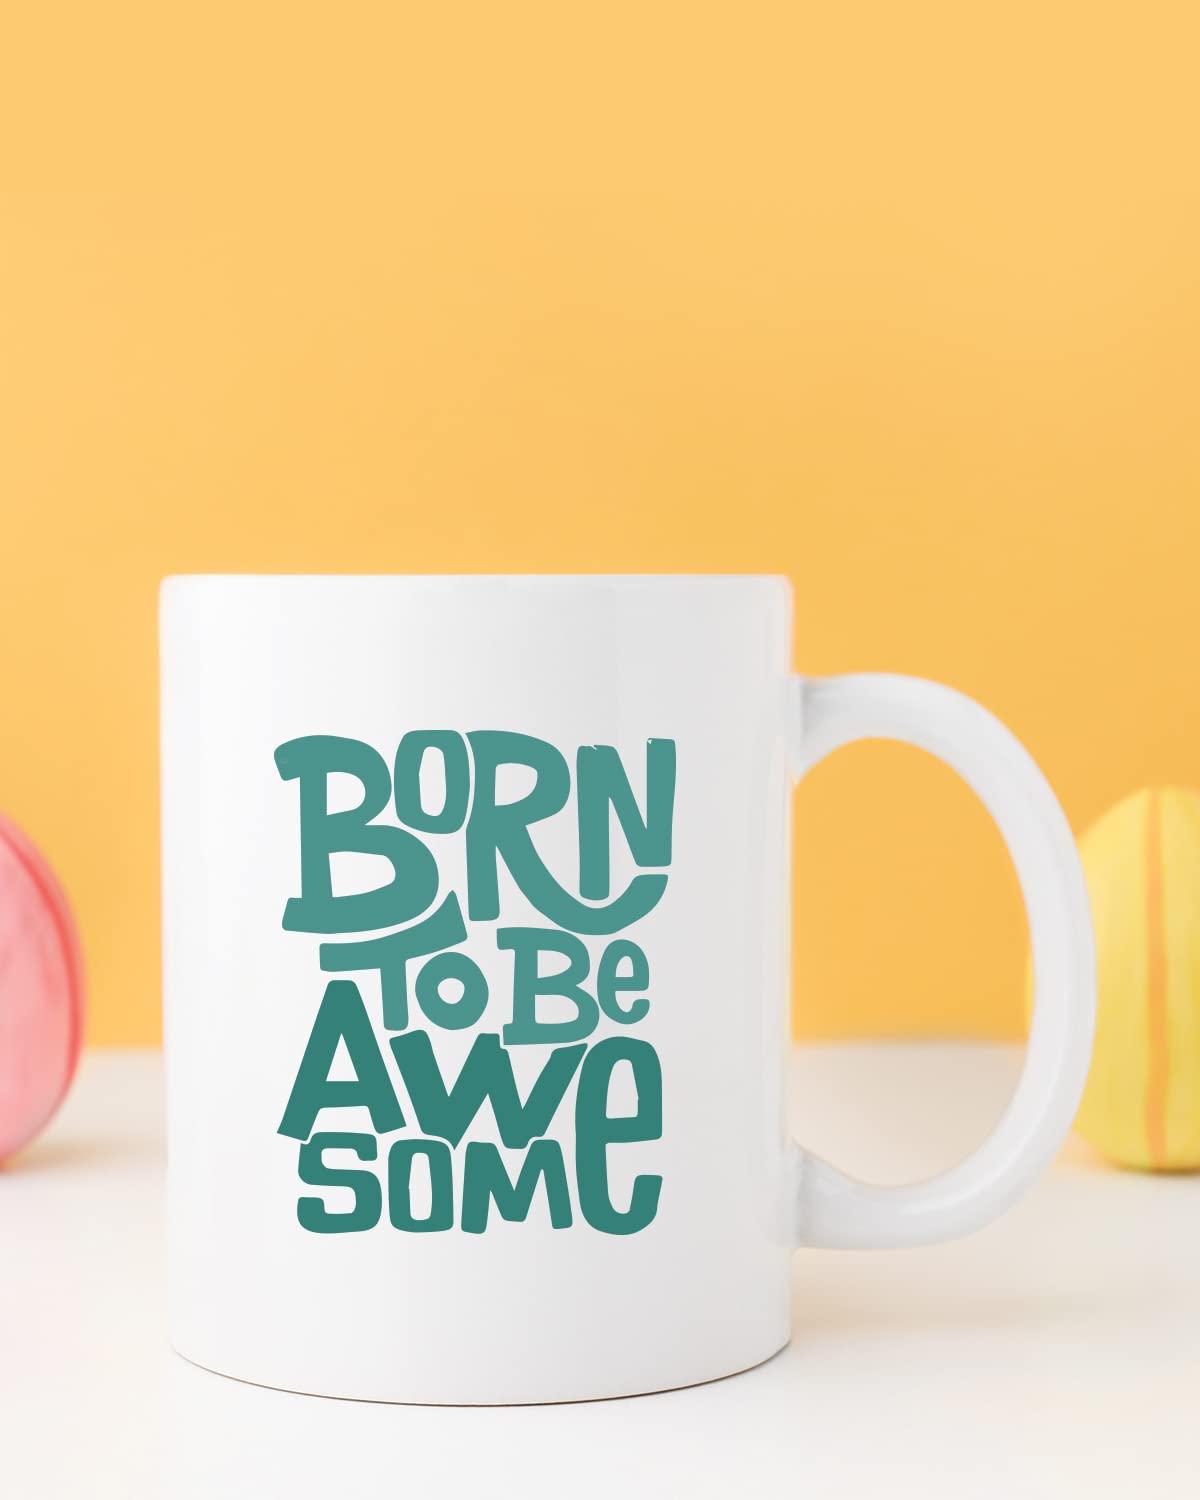 Born to BE Awesome Coffee Mug - Gift for Friend, Birthday Gift, Birthday Mug, Motivational Quotes Mug, Mugs with Funny & Funky Dialogues, Bollywood Mugs, Funny Mugs for Him & Her